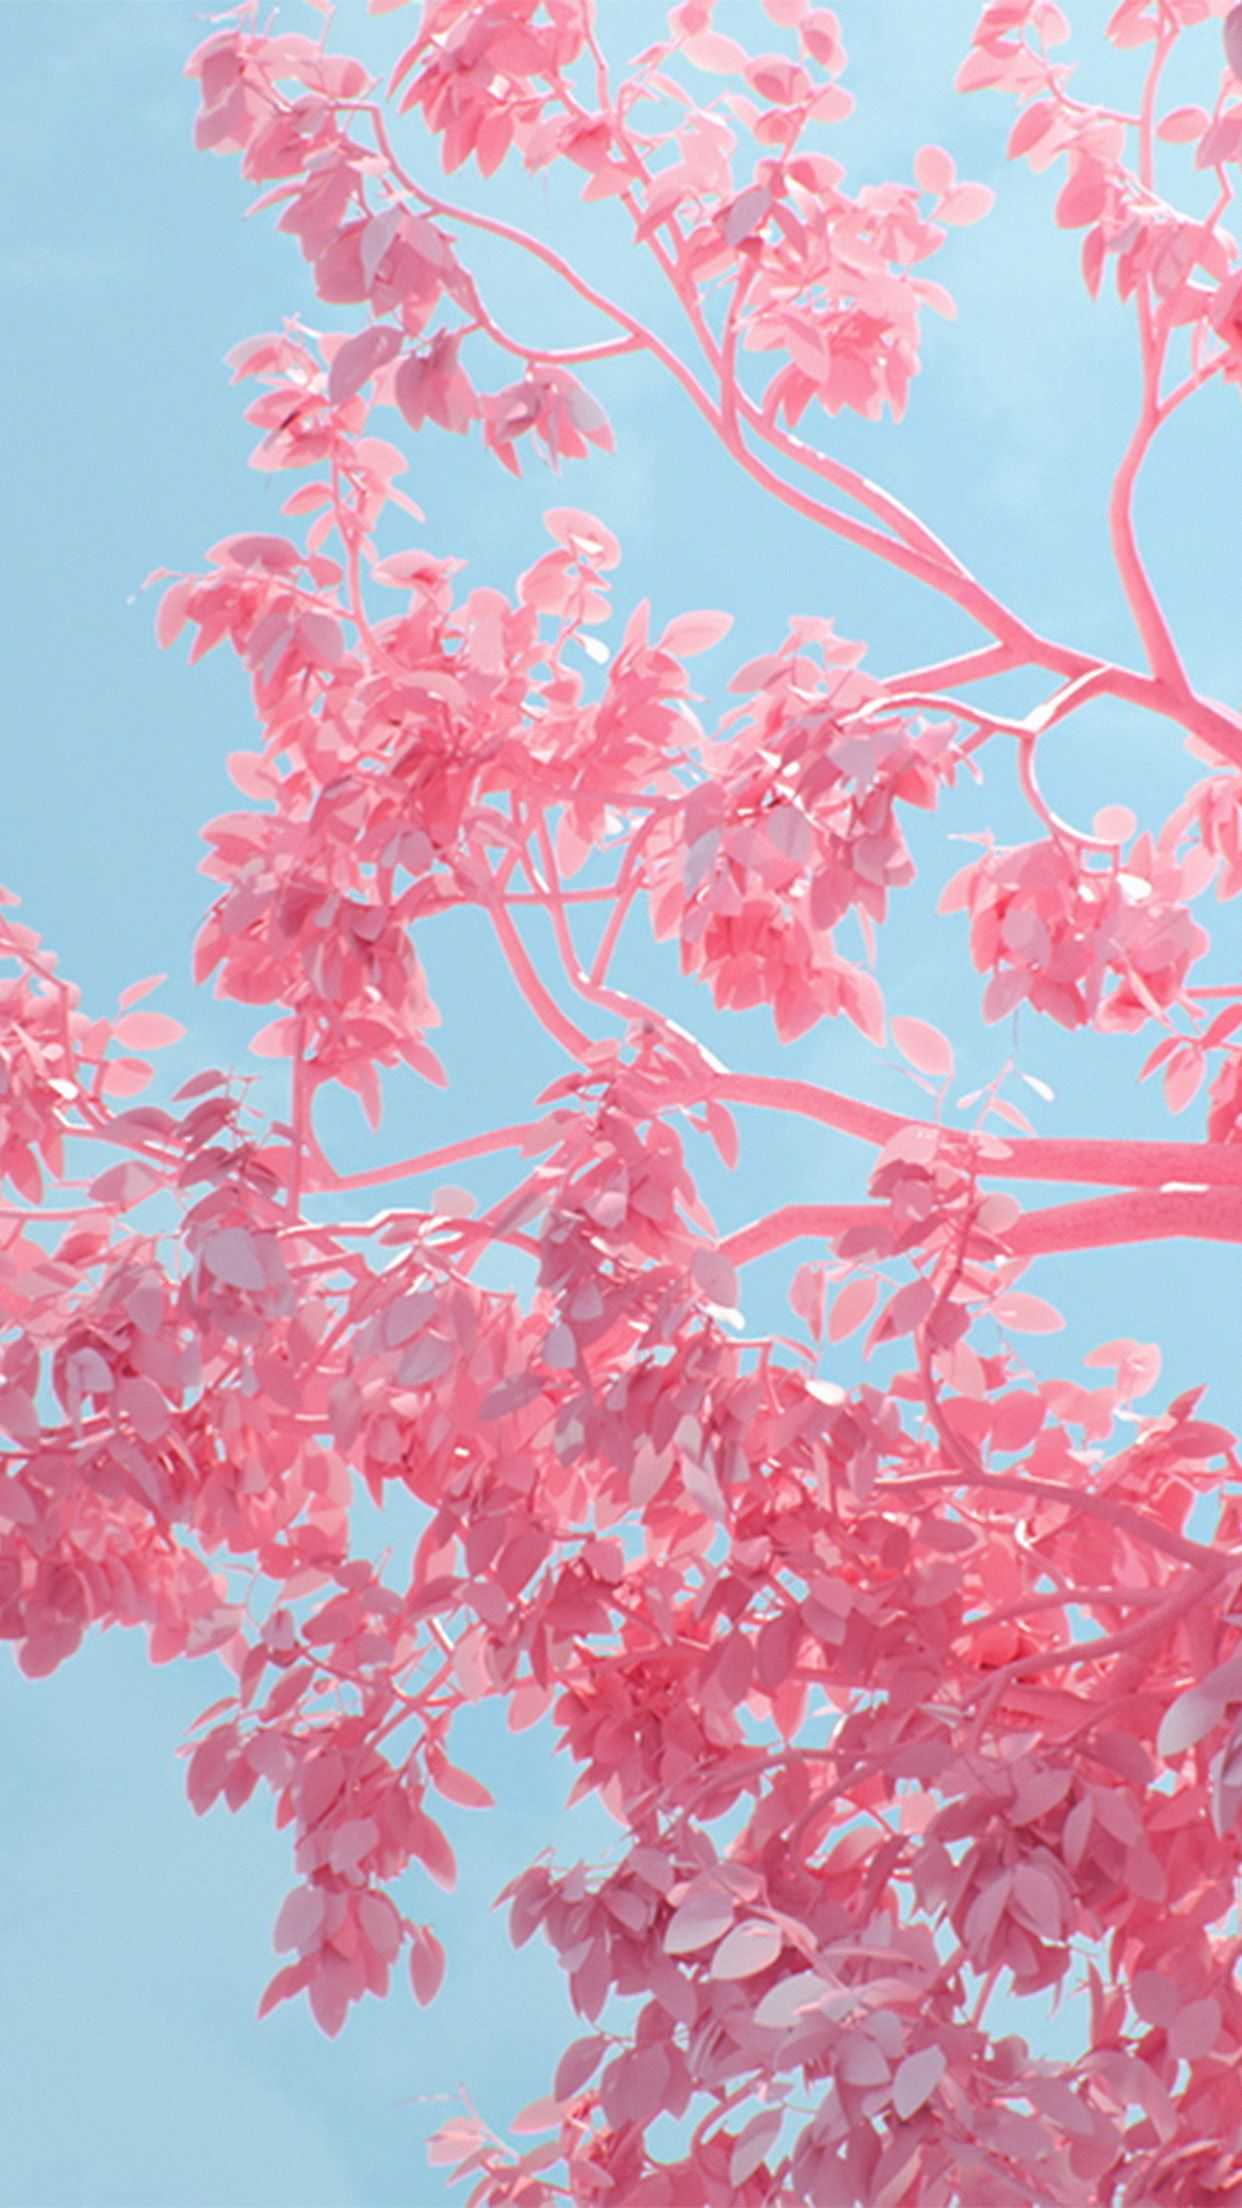 IPhone wallpaper of a pink tree against a blue sky - Soft pink, light pink